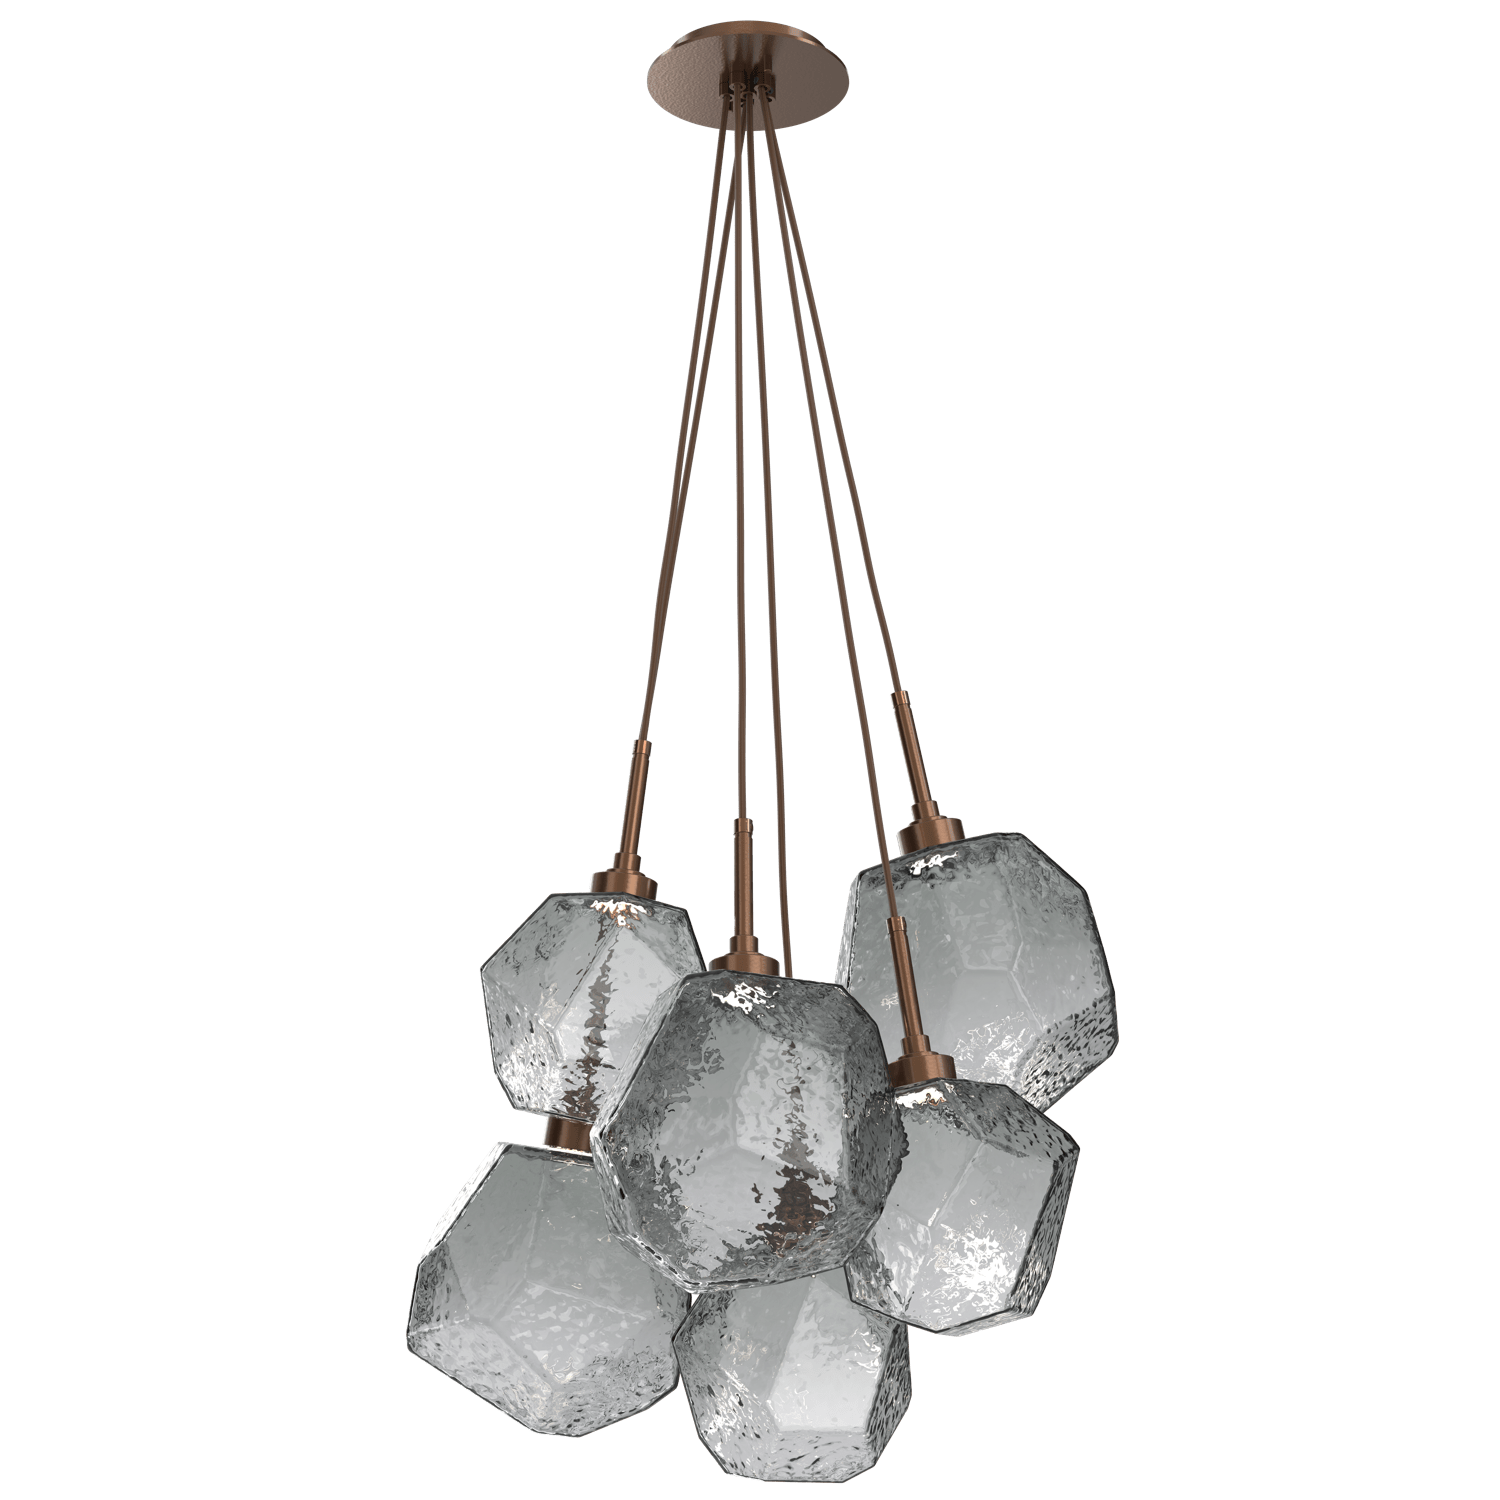 CHB0039-0F-BB-S-Hammerton-Studio-Gem-6-light-cluster-pendant-light-with-burnished-bronze-finish-and-smoke-blown-glass-shades-and-LED-lamping